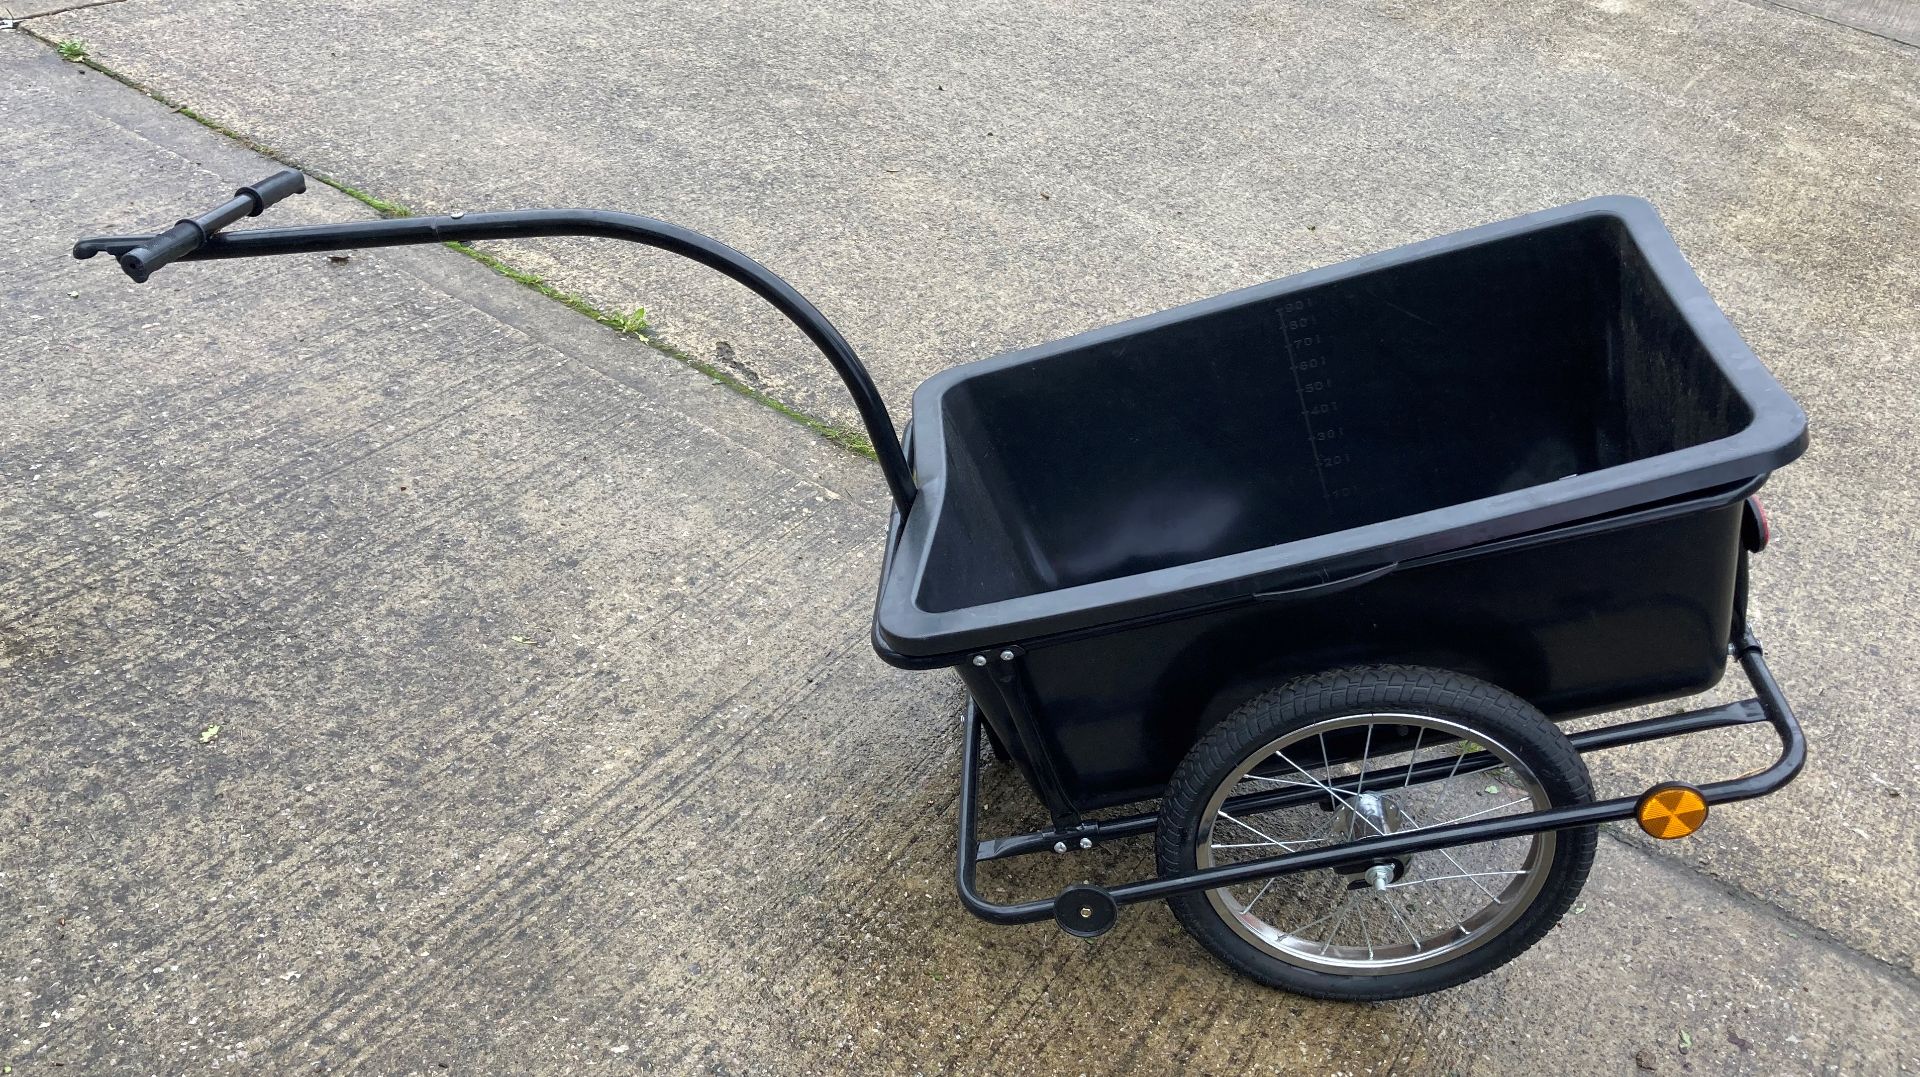 1 x new bicycle trailer, RRP £99.